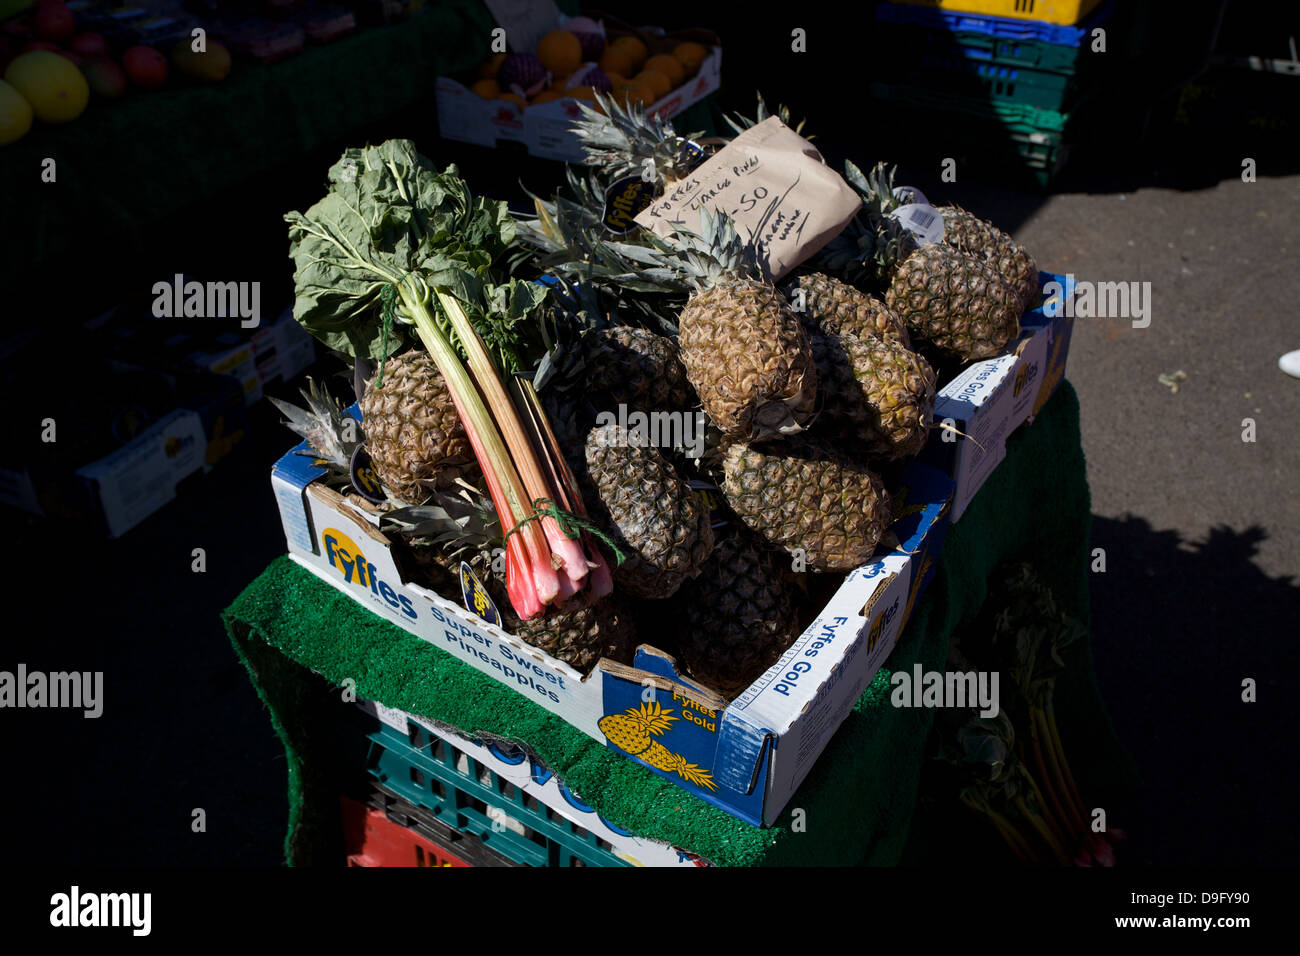 Pineapples and rhubarb for sale in a box at a farmers market. Stock Photo